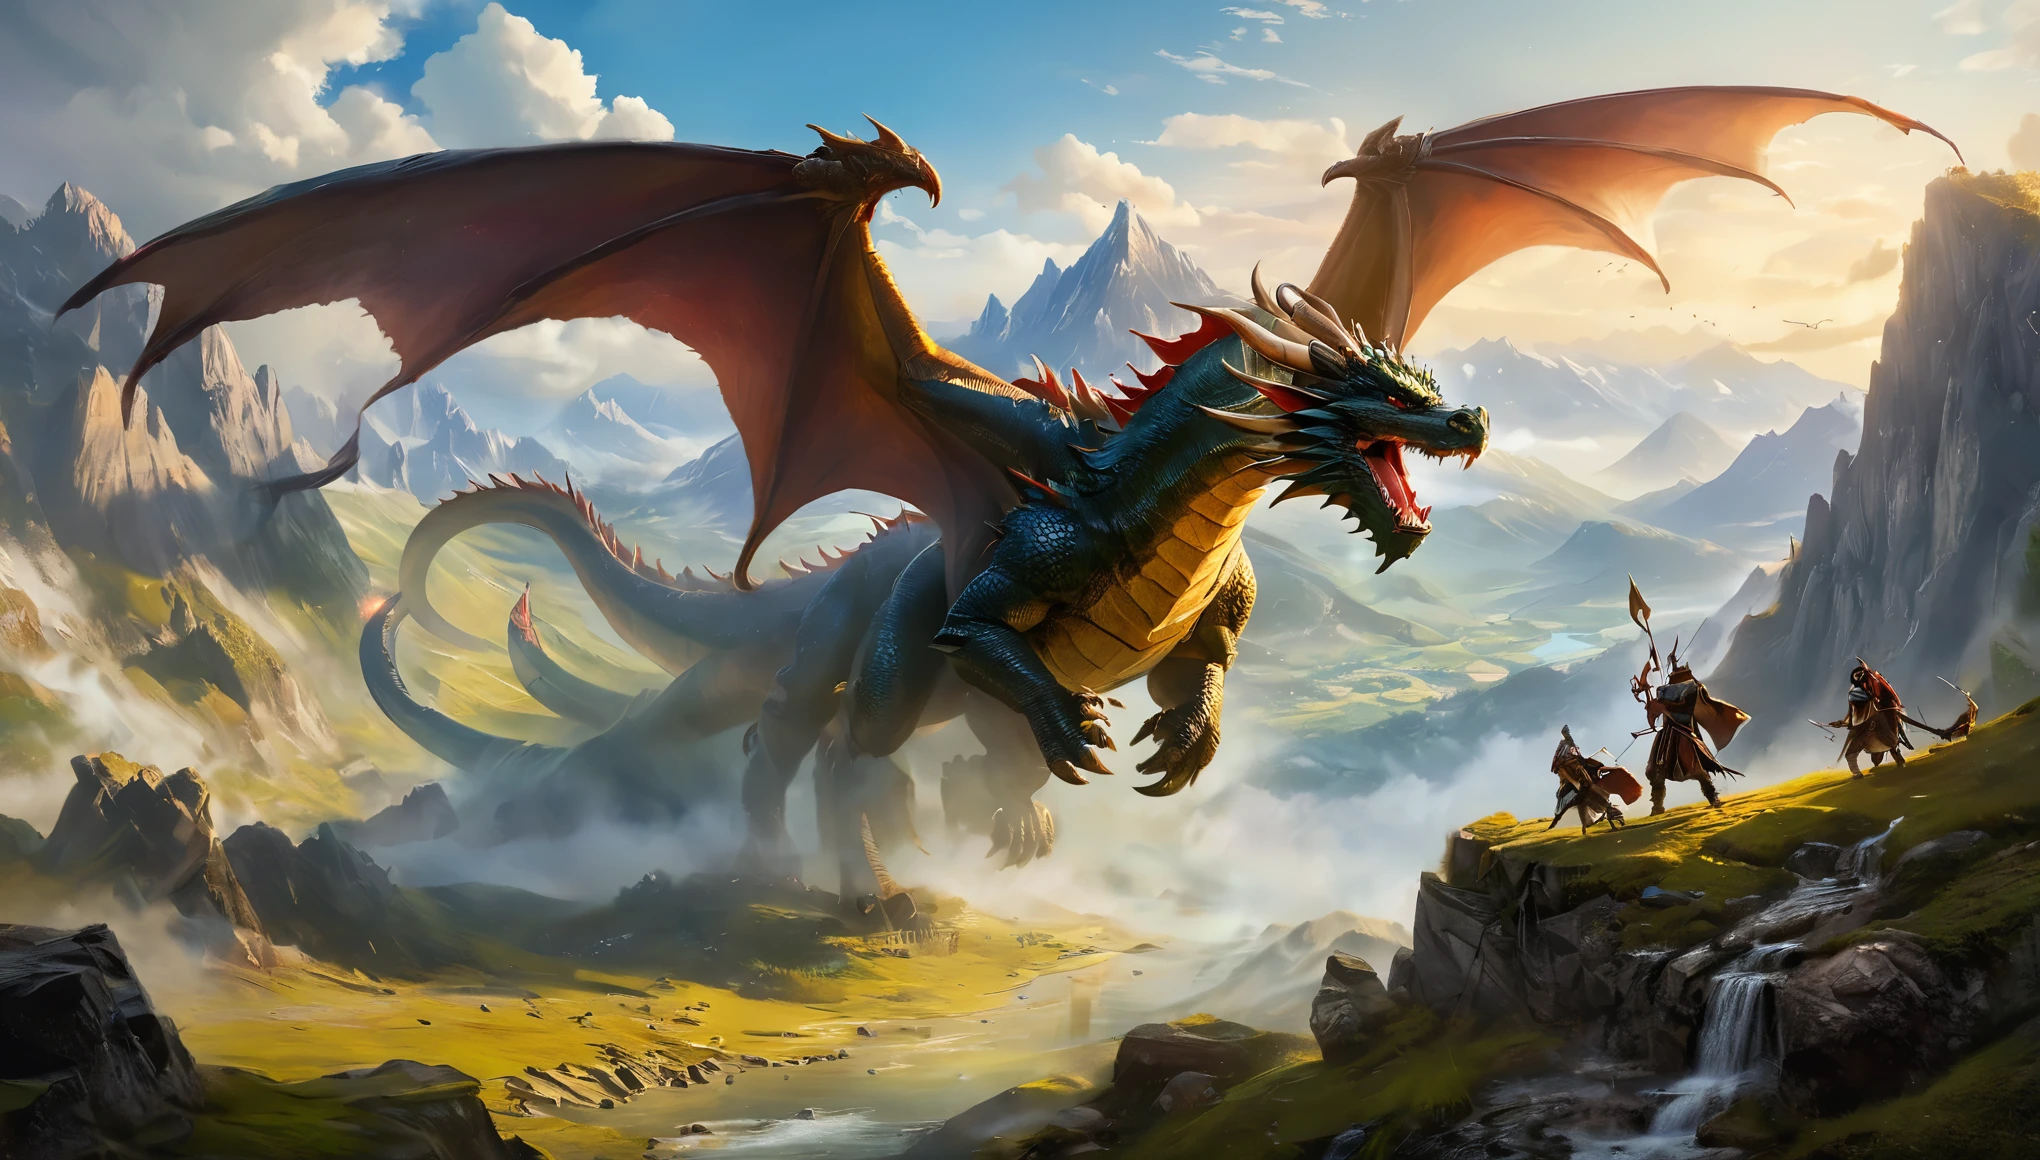 a group of people standing on a cliff with dragon flying above, concept art by Raphael Lacoste, trending on Artstation, fantasy art, dragon age, dragon age inquisition, elder scrolls art, medieval fantasy game art, epic elder scrolls art, dragons, dragons flying in the sky, elderscrolls, dragons flying around, hyperrealistic d & d fantasy art